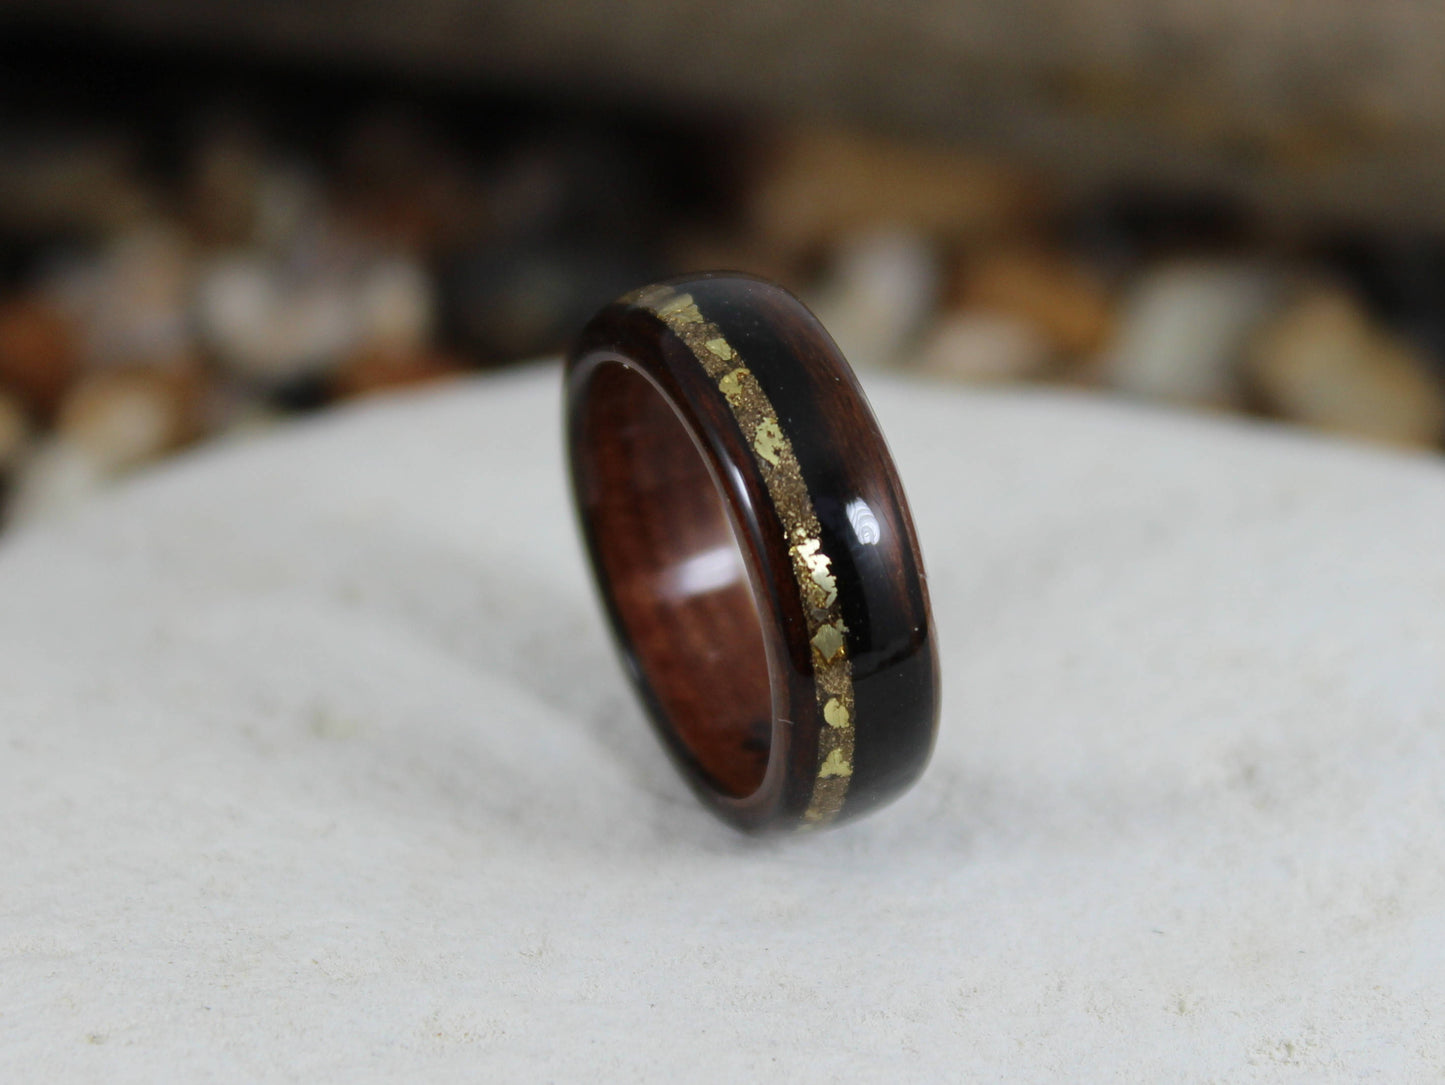 Ebony Bent Wood Ring with Gold Dust